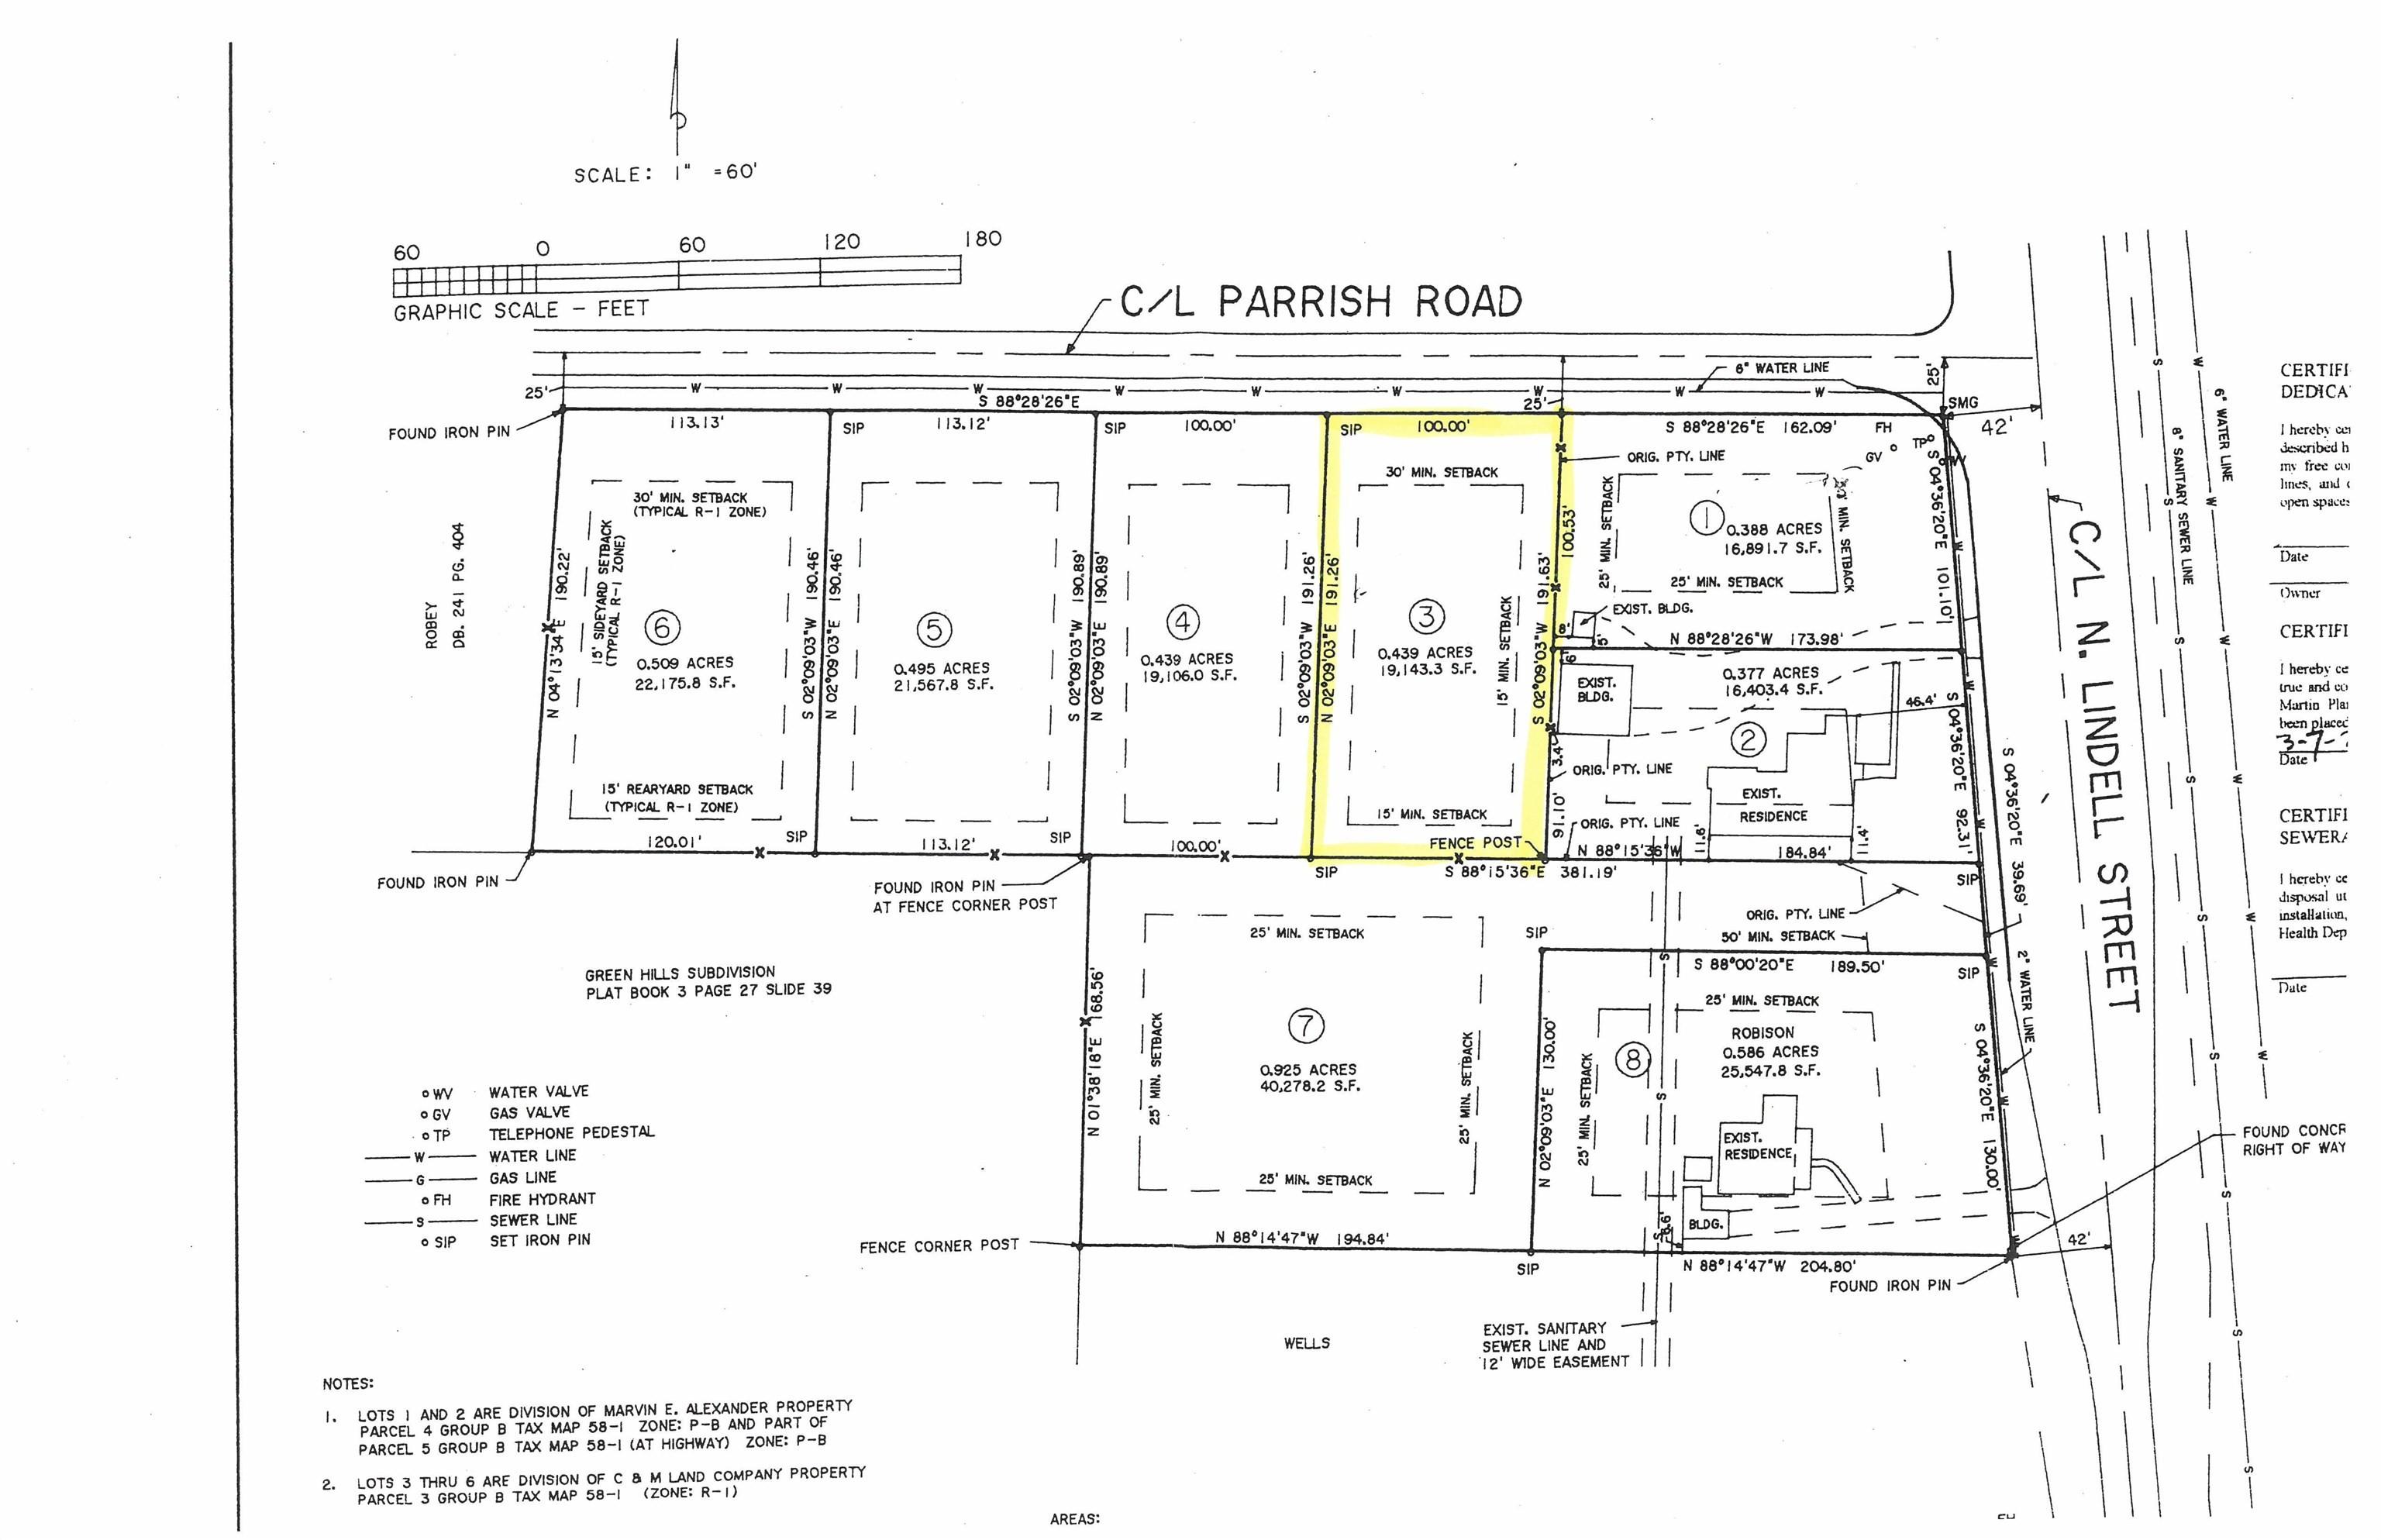 Property Image for 148 Parrish Road (Tract 3)